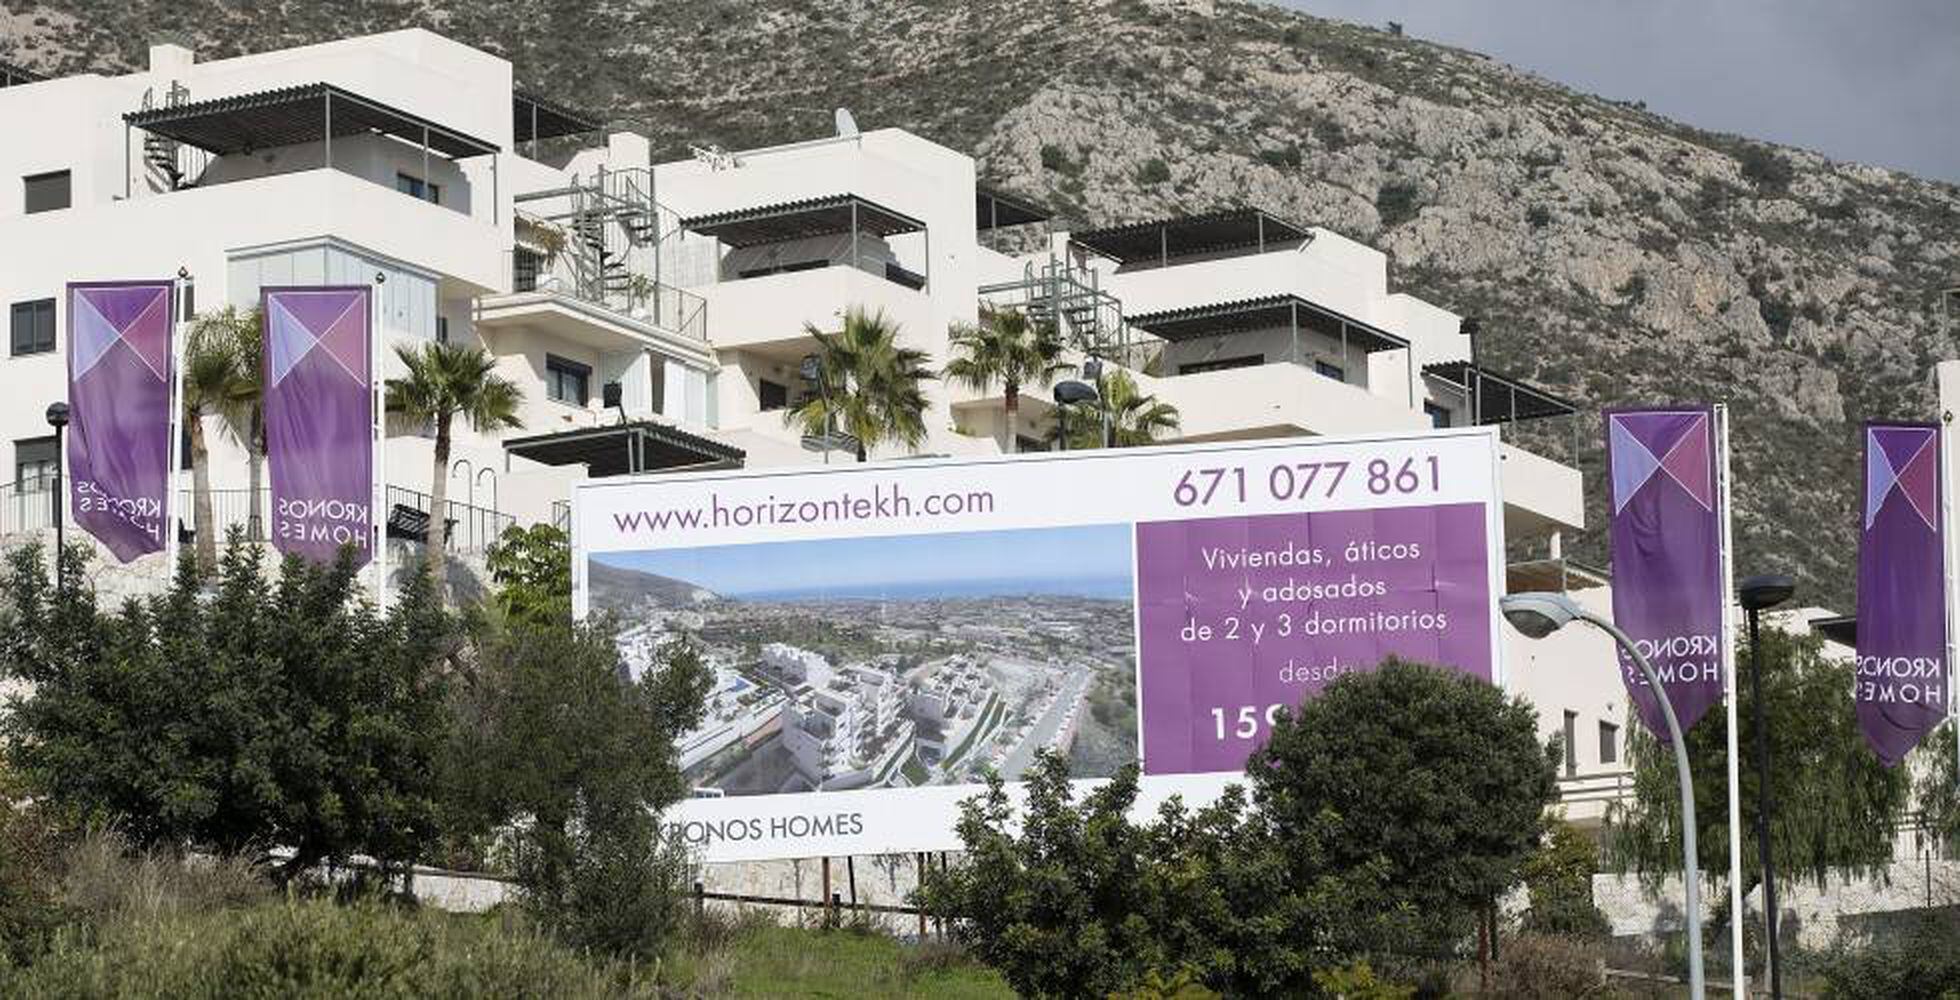 Buying A Home In Spain If You Re Not A Resident In Spain What Are Your Mortgage Options Economy And Business El Pais In English